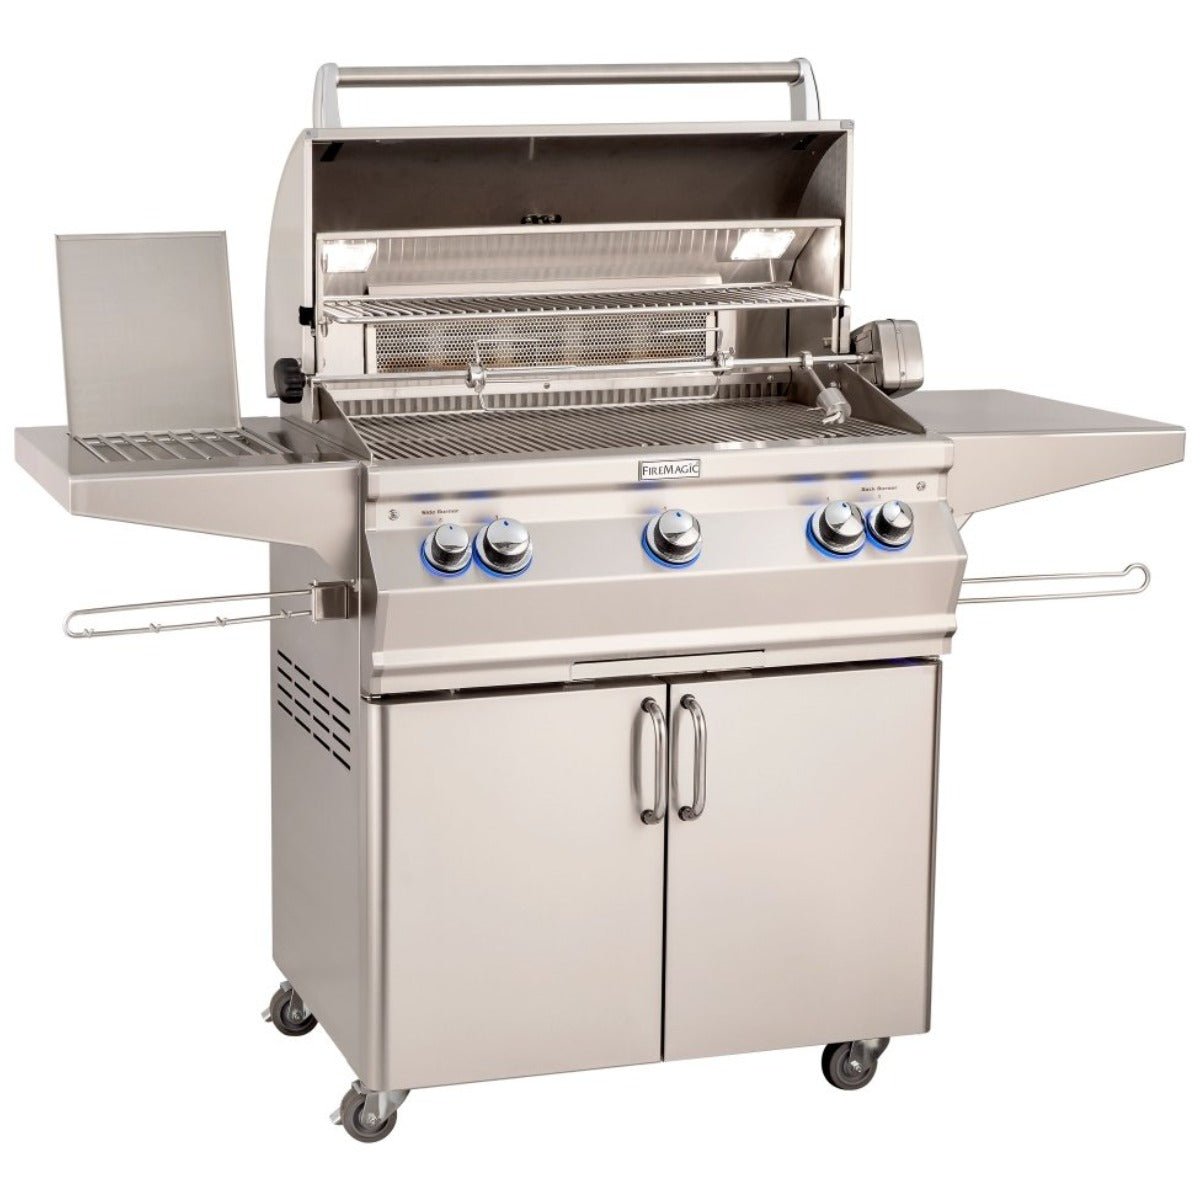 Fire Magic Grills Aurora A660s Portable Grill with Rotisserie Kit &amp; Side Burner. High-quality outdoor grilling - Outdoorium